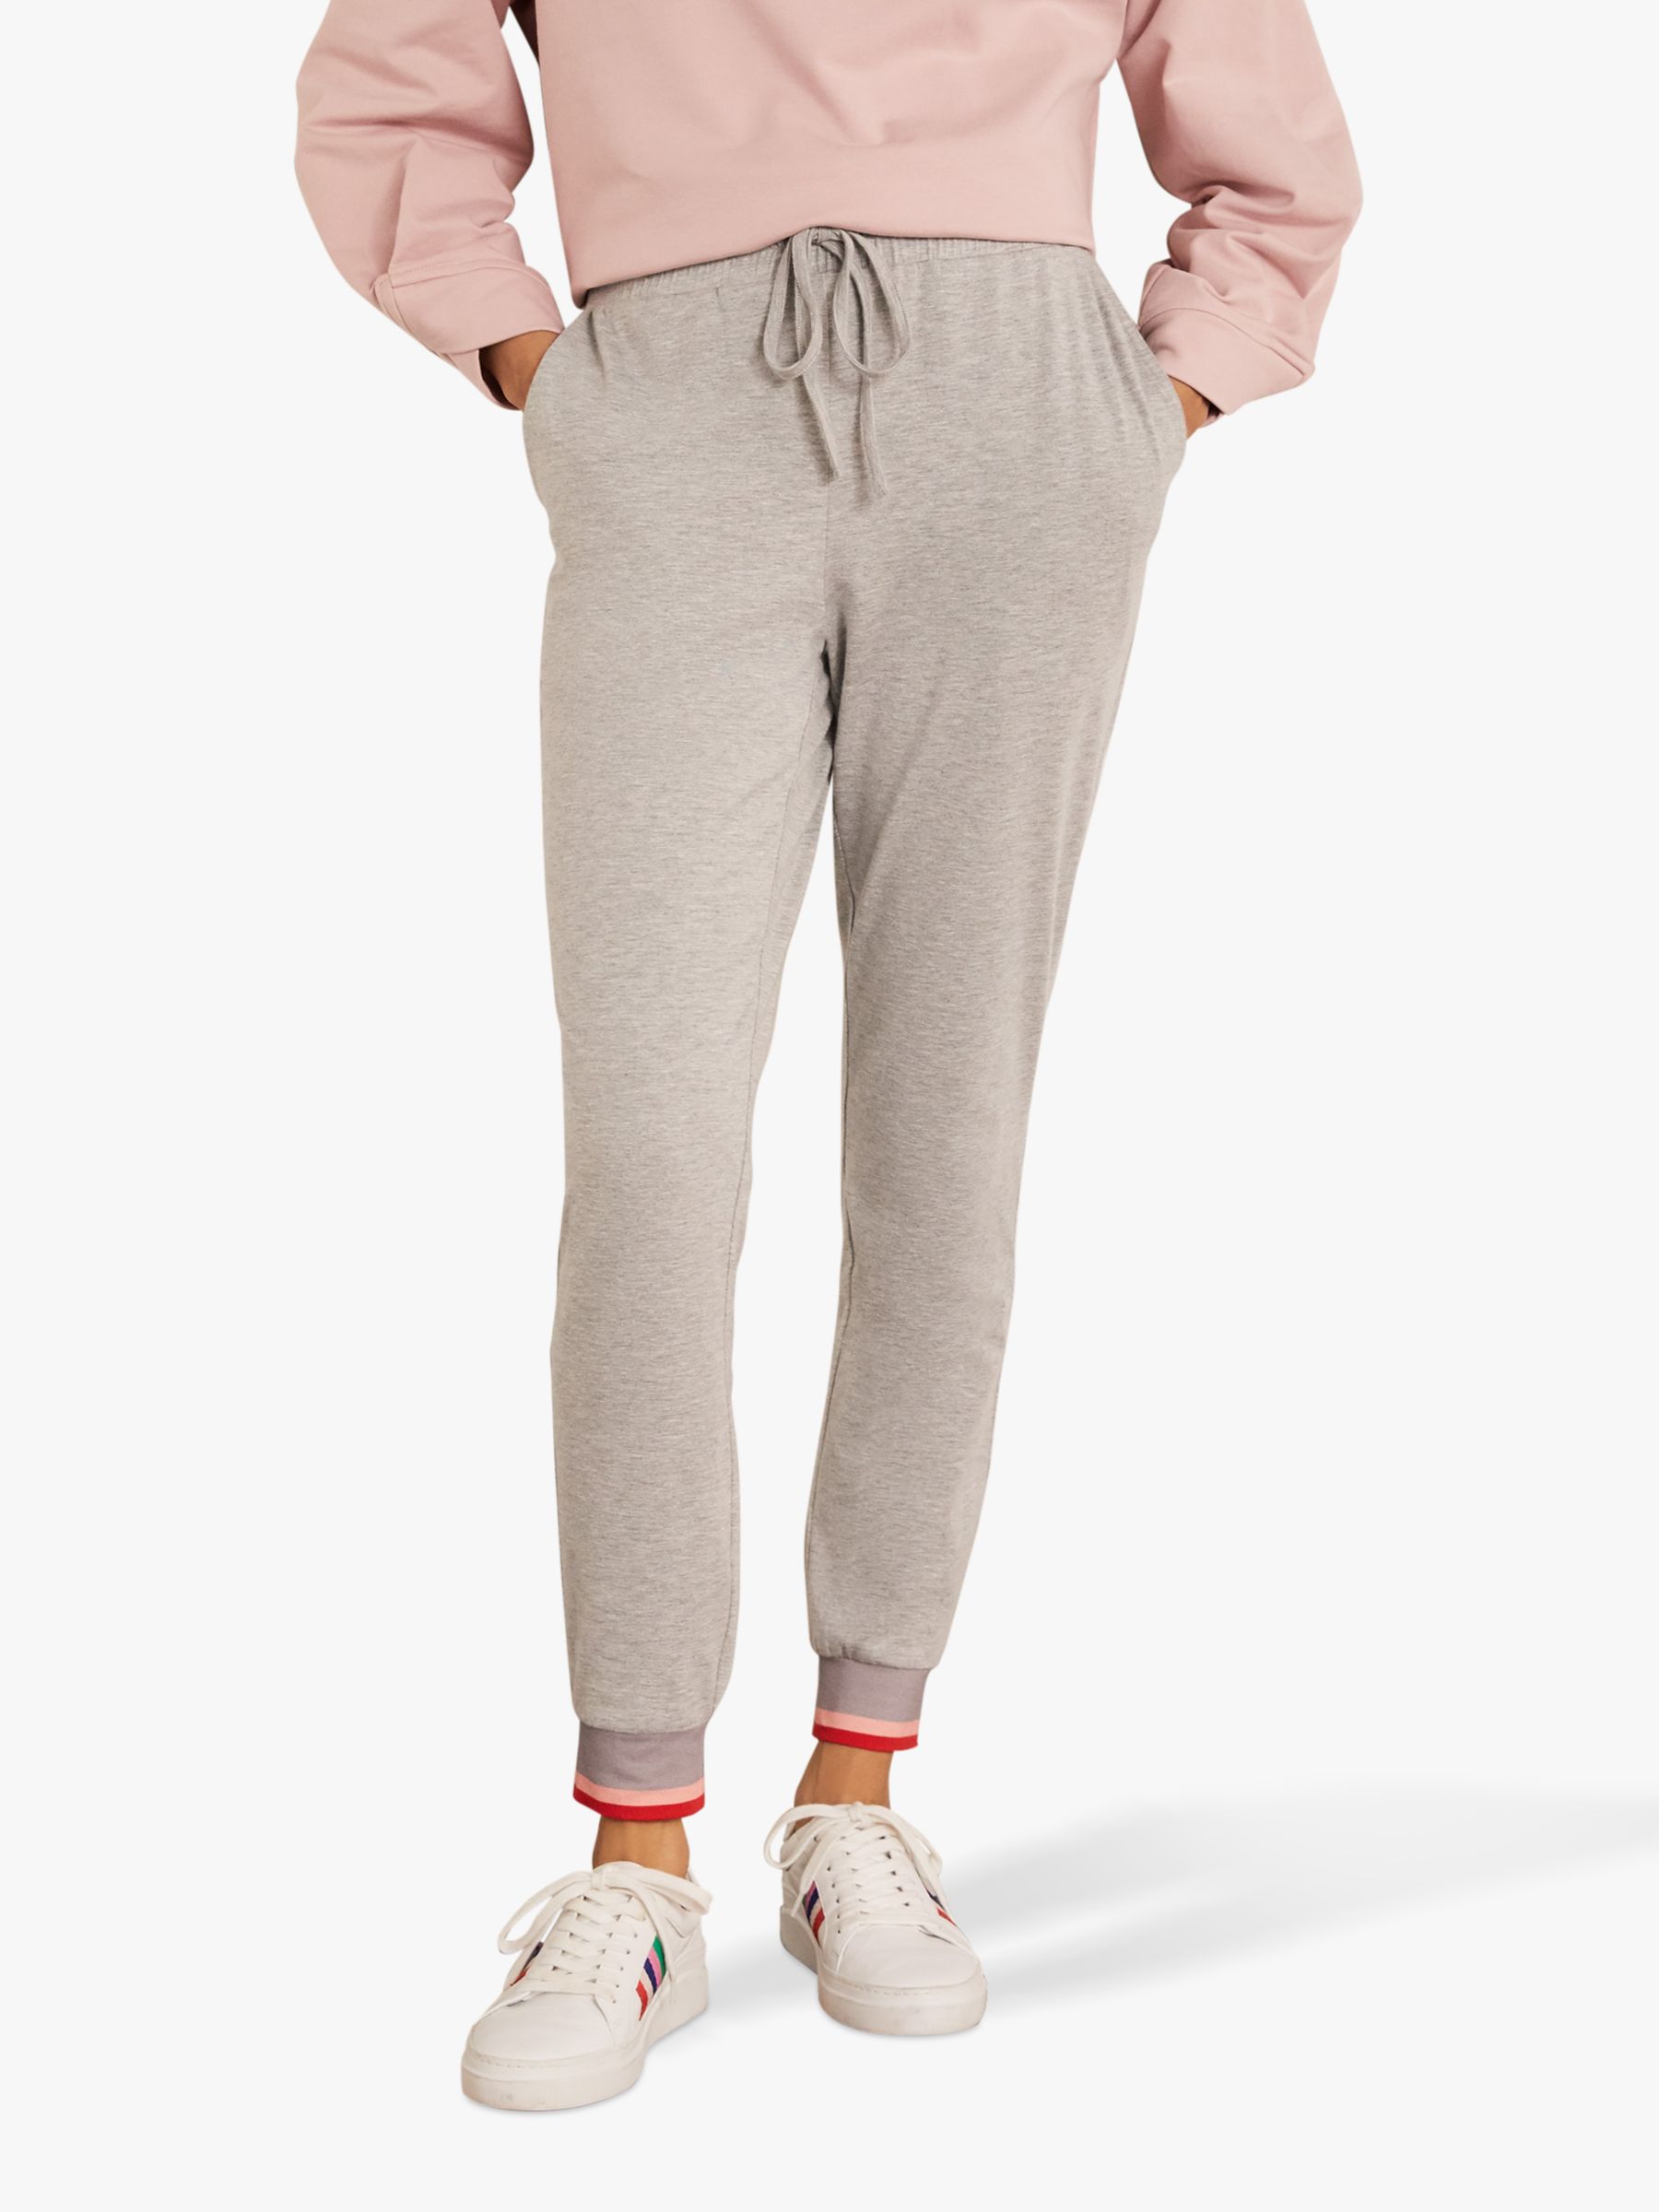 Boden Cuffed Joggers